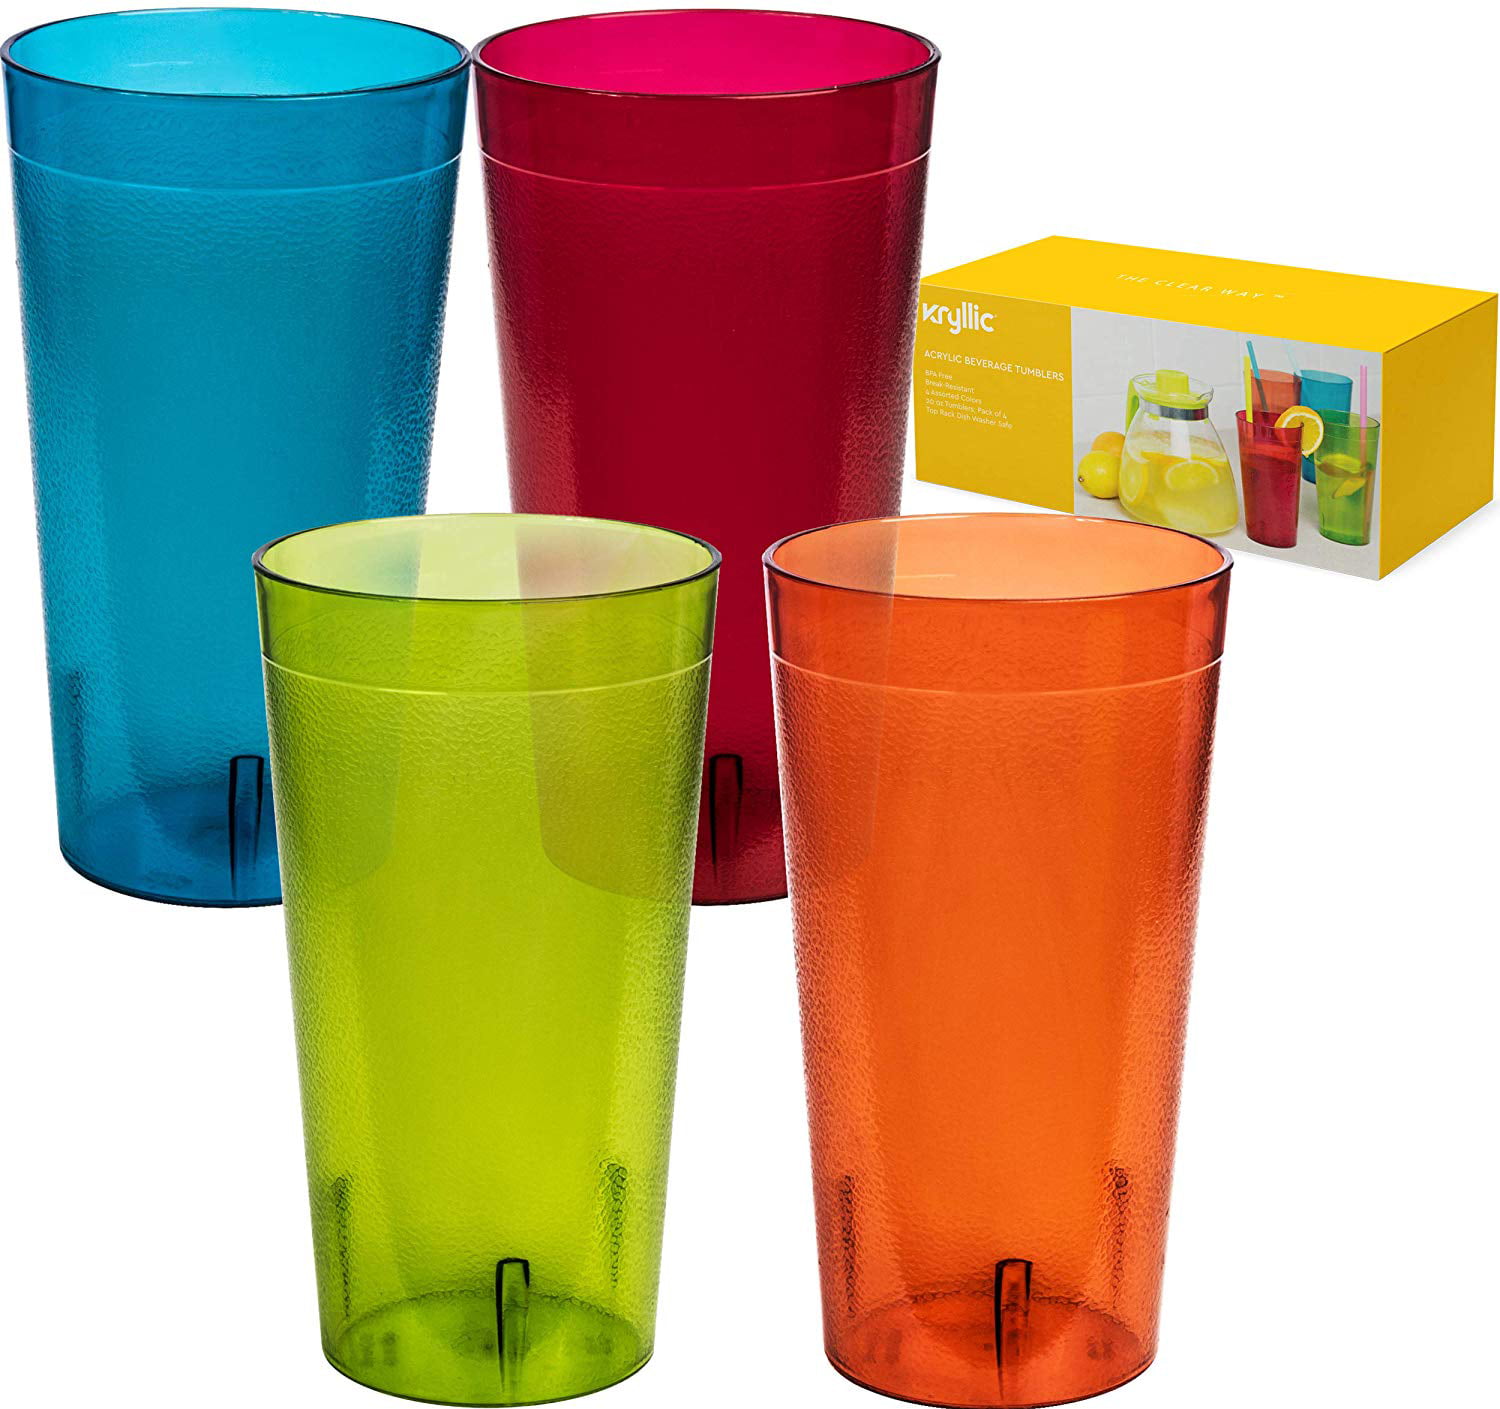 20-ounce Plastic Tumblers Large Drinking Glasses Party Cups Set of 12 Colors Mix 